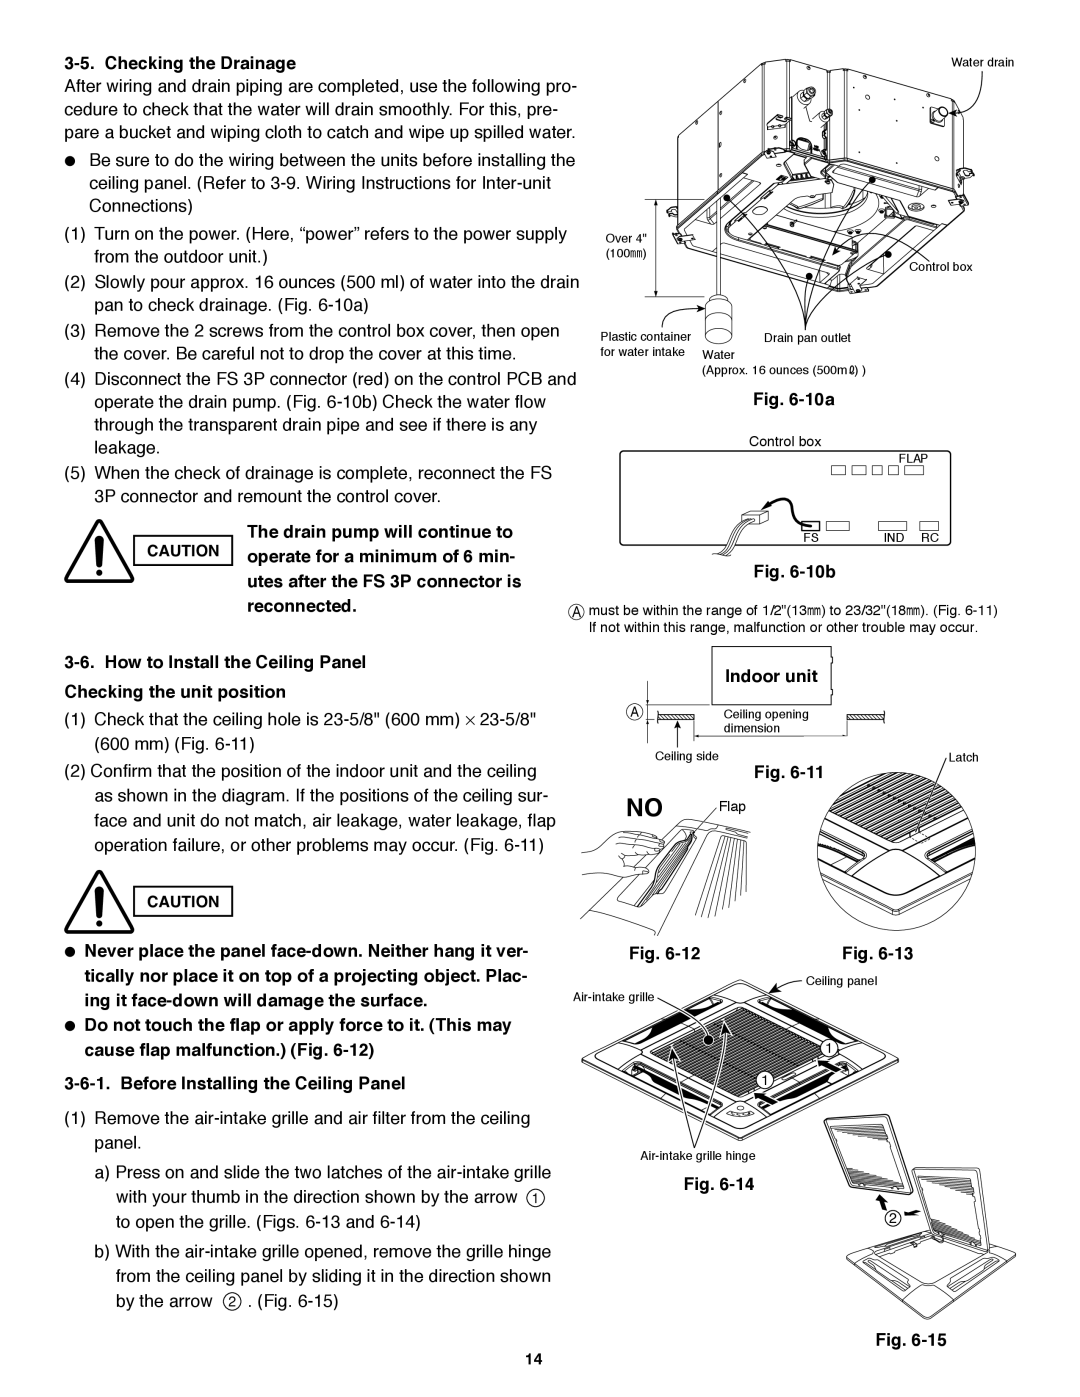 Panasonic CS-KS12NB41 & CZ-18BT1U Checking the Drainage, 10a, 10b, How to Install the Ceiling Panel, Indoor unit, Fig 